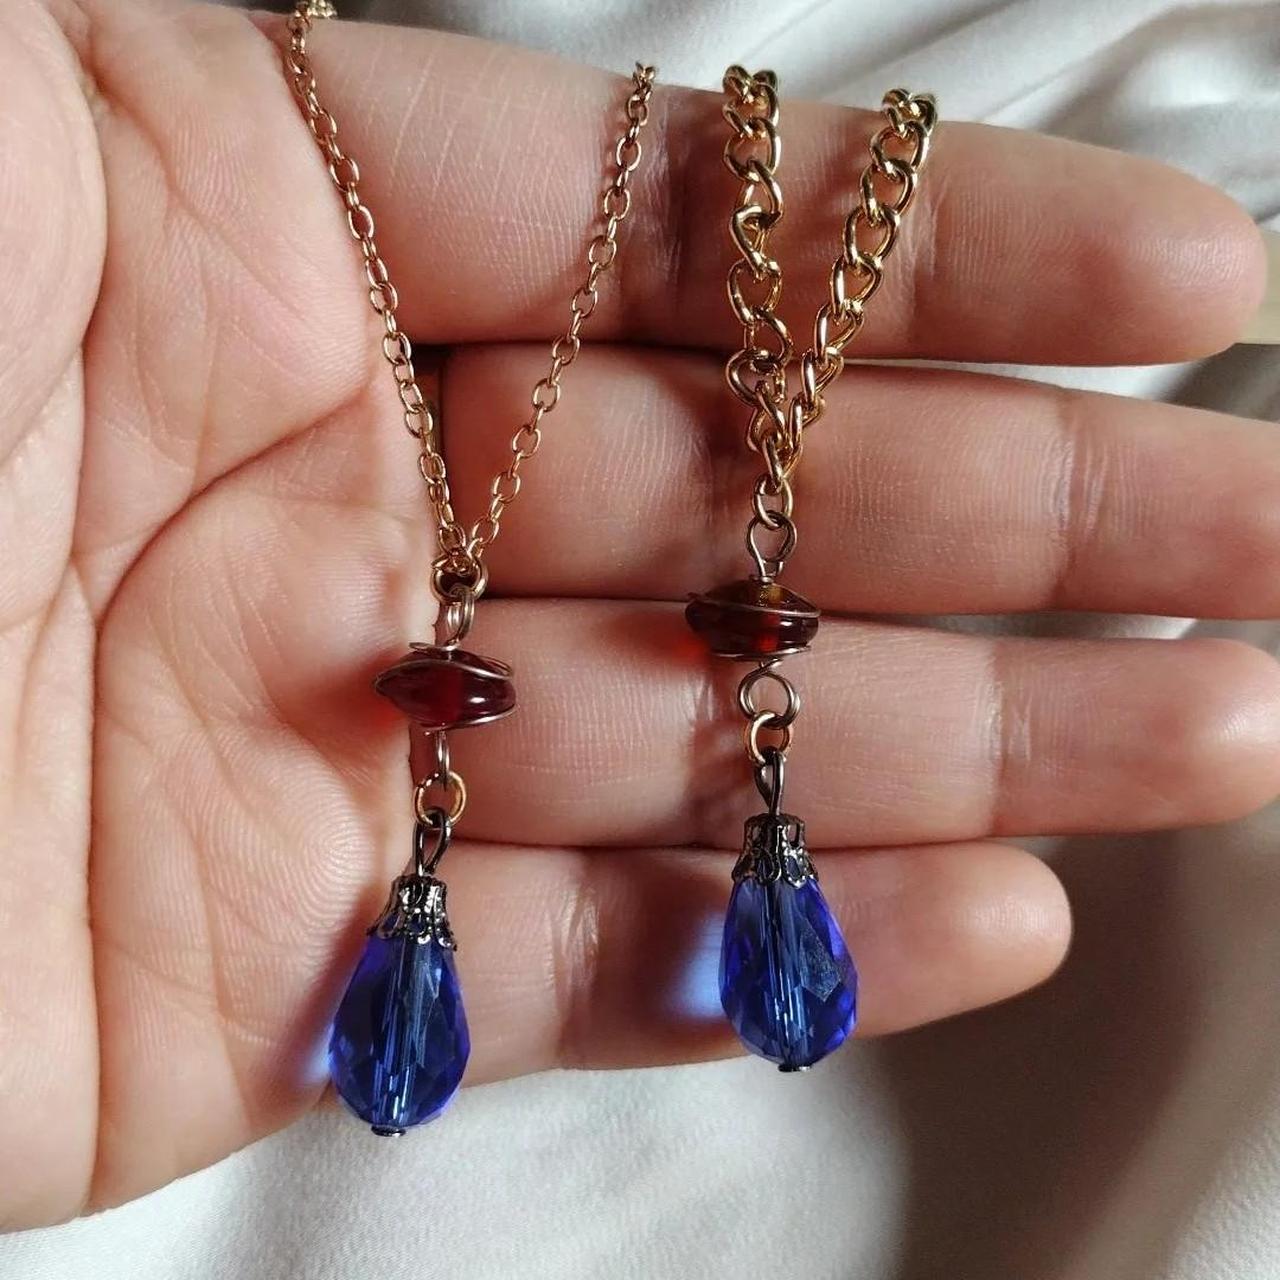 Buy Howls Necklace Howls Earrings Howls Moving Castle Earrings Necklace  Set. Emerald Colored Crystal Teardrop Earrings Peacock Blue Necklace Online  in India - Etsy